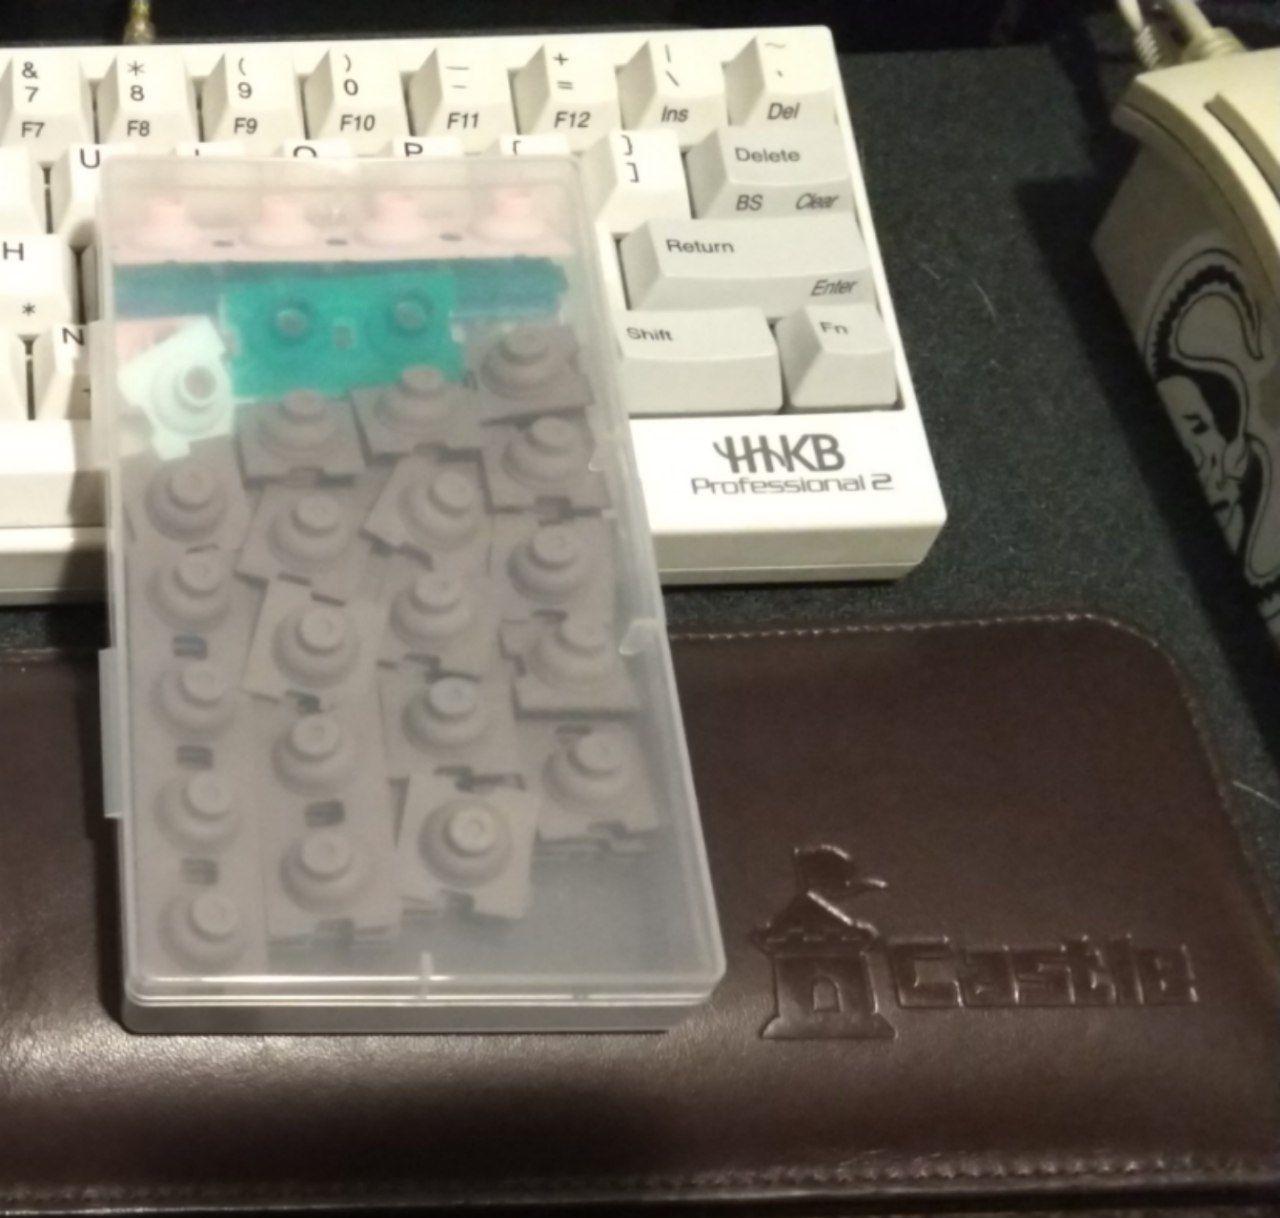 Stock HHKB domes and the extra varied weight domes in a box.